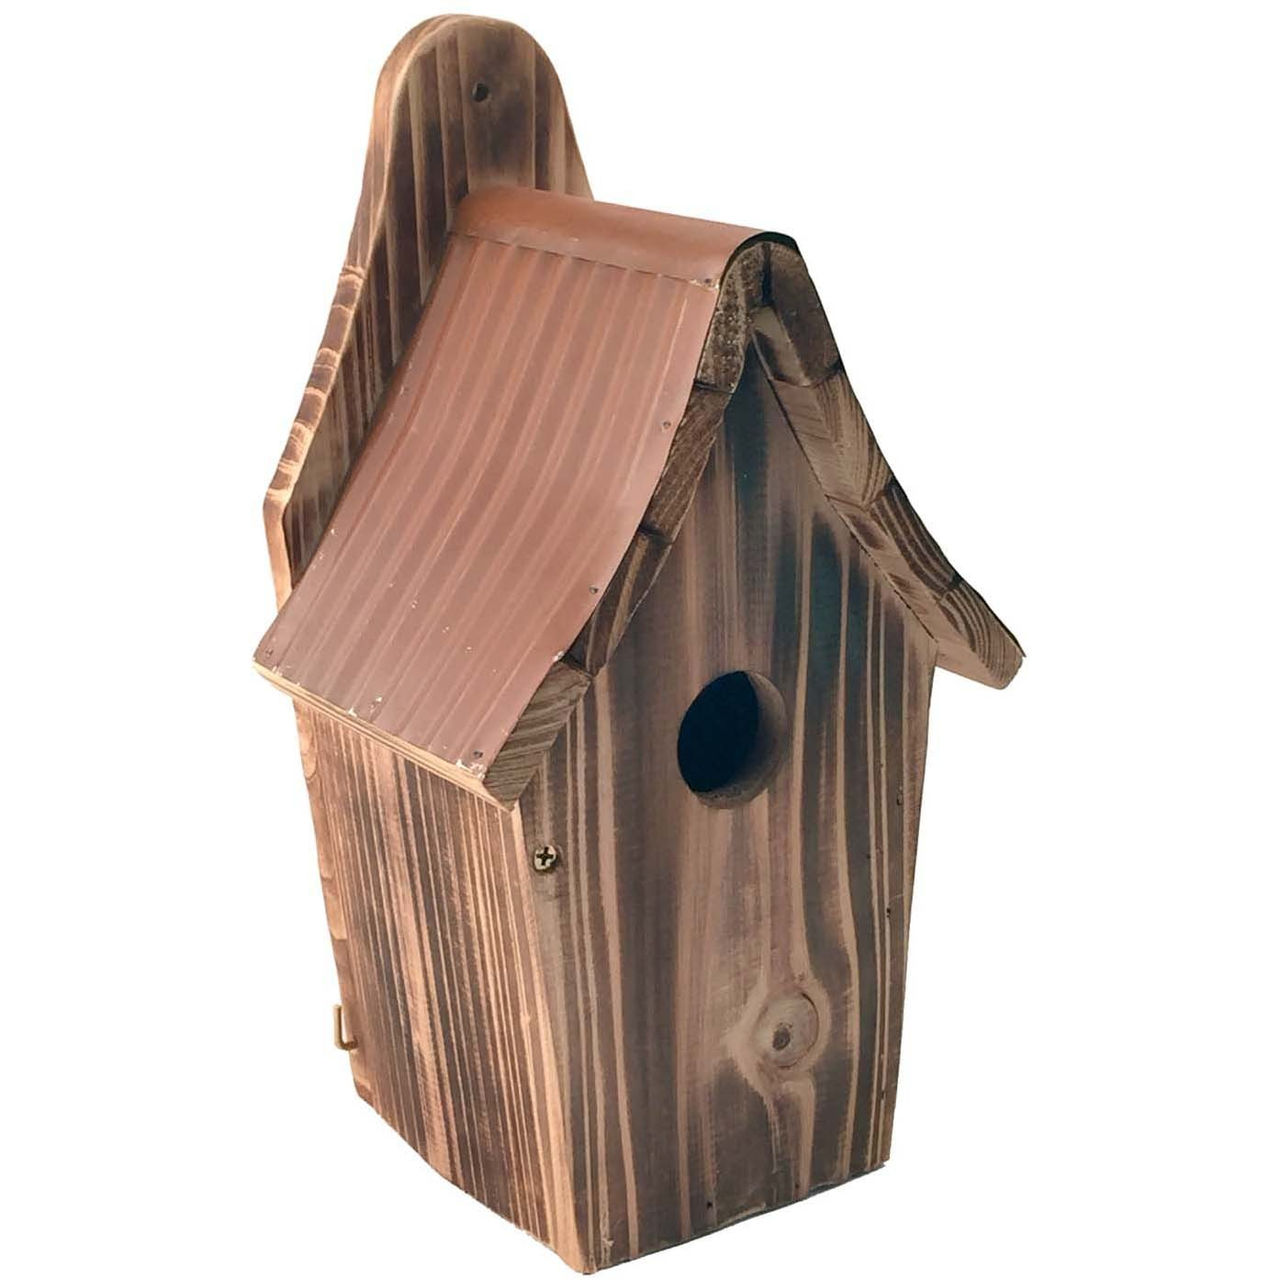 image links to all bird houses